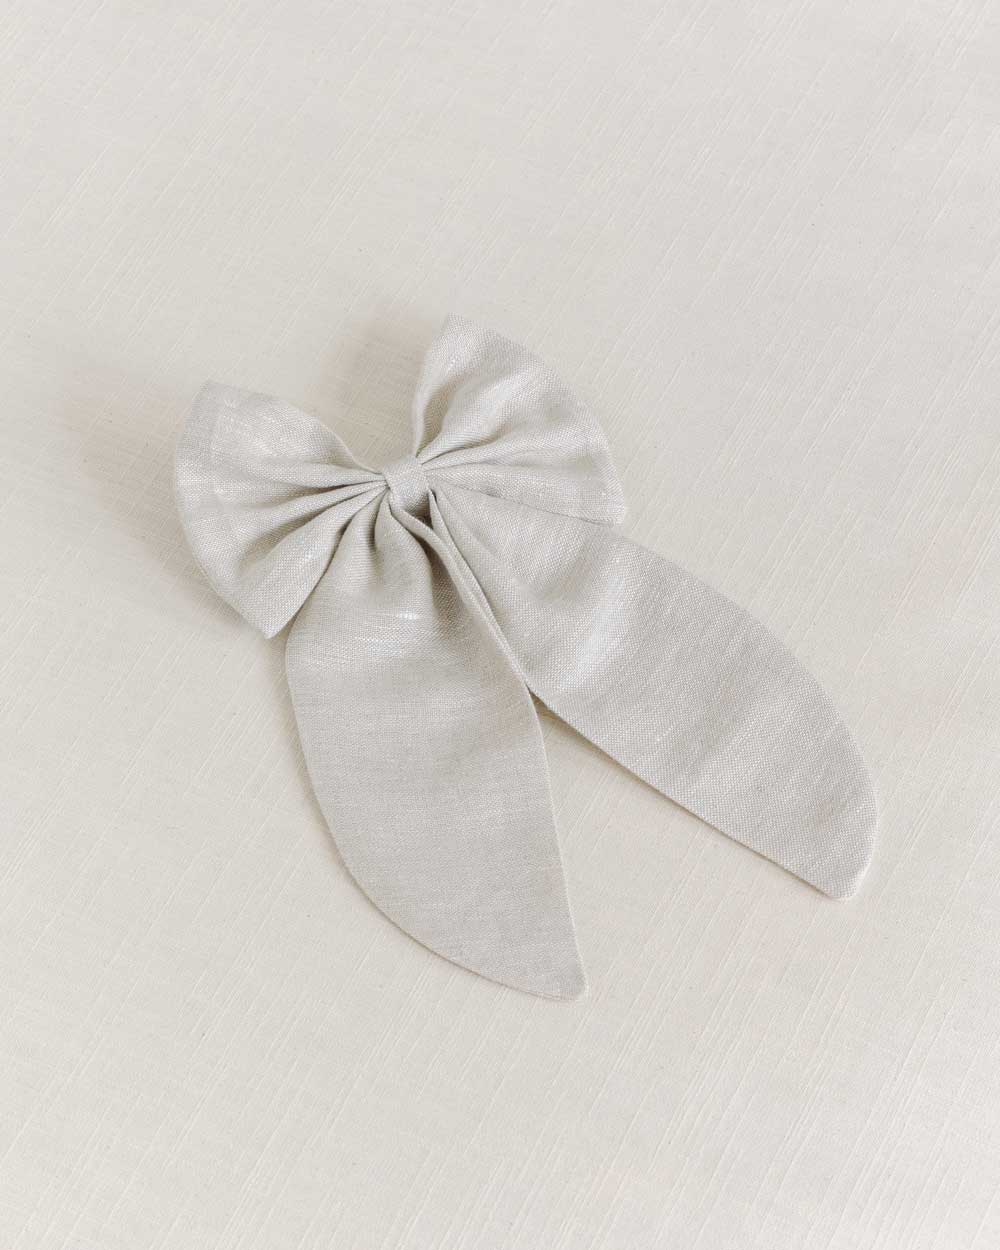 THE NATURAL LINEN BOW